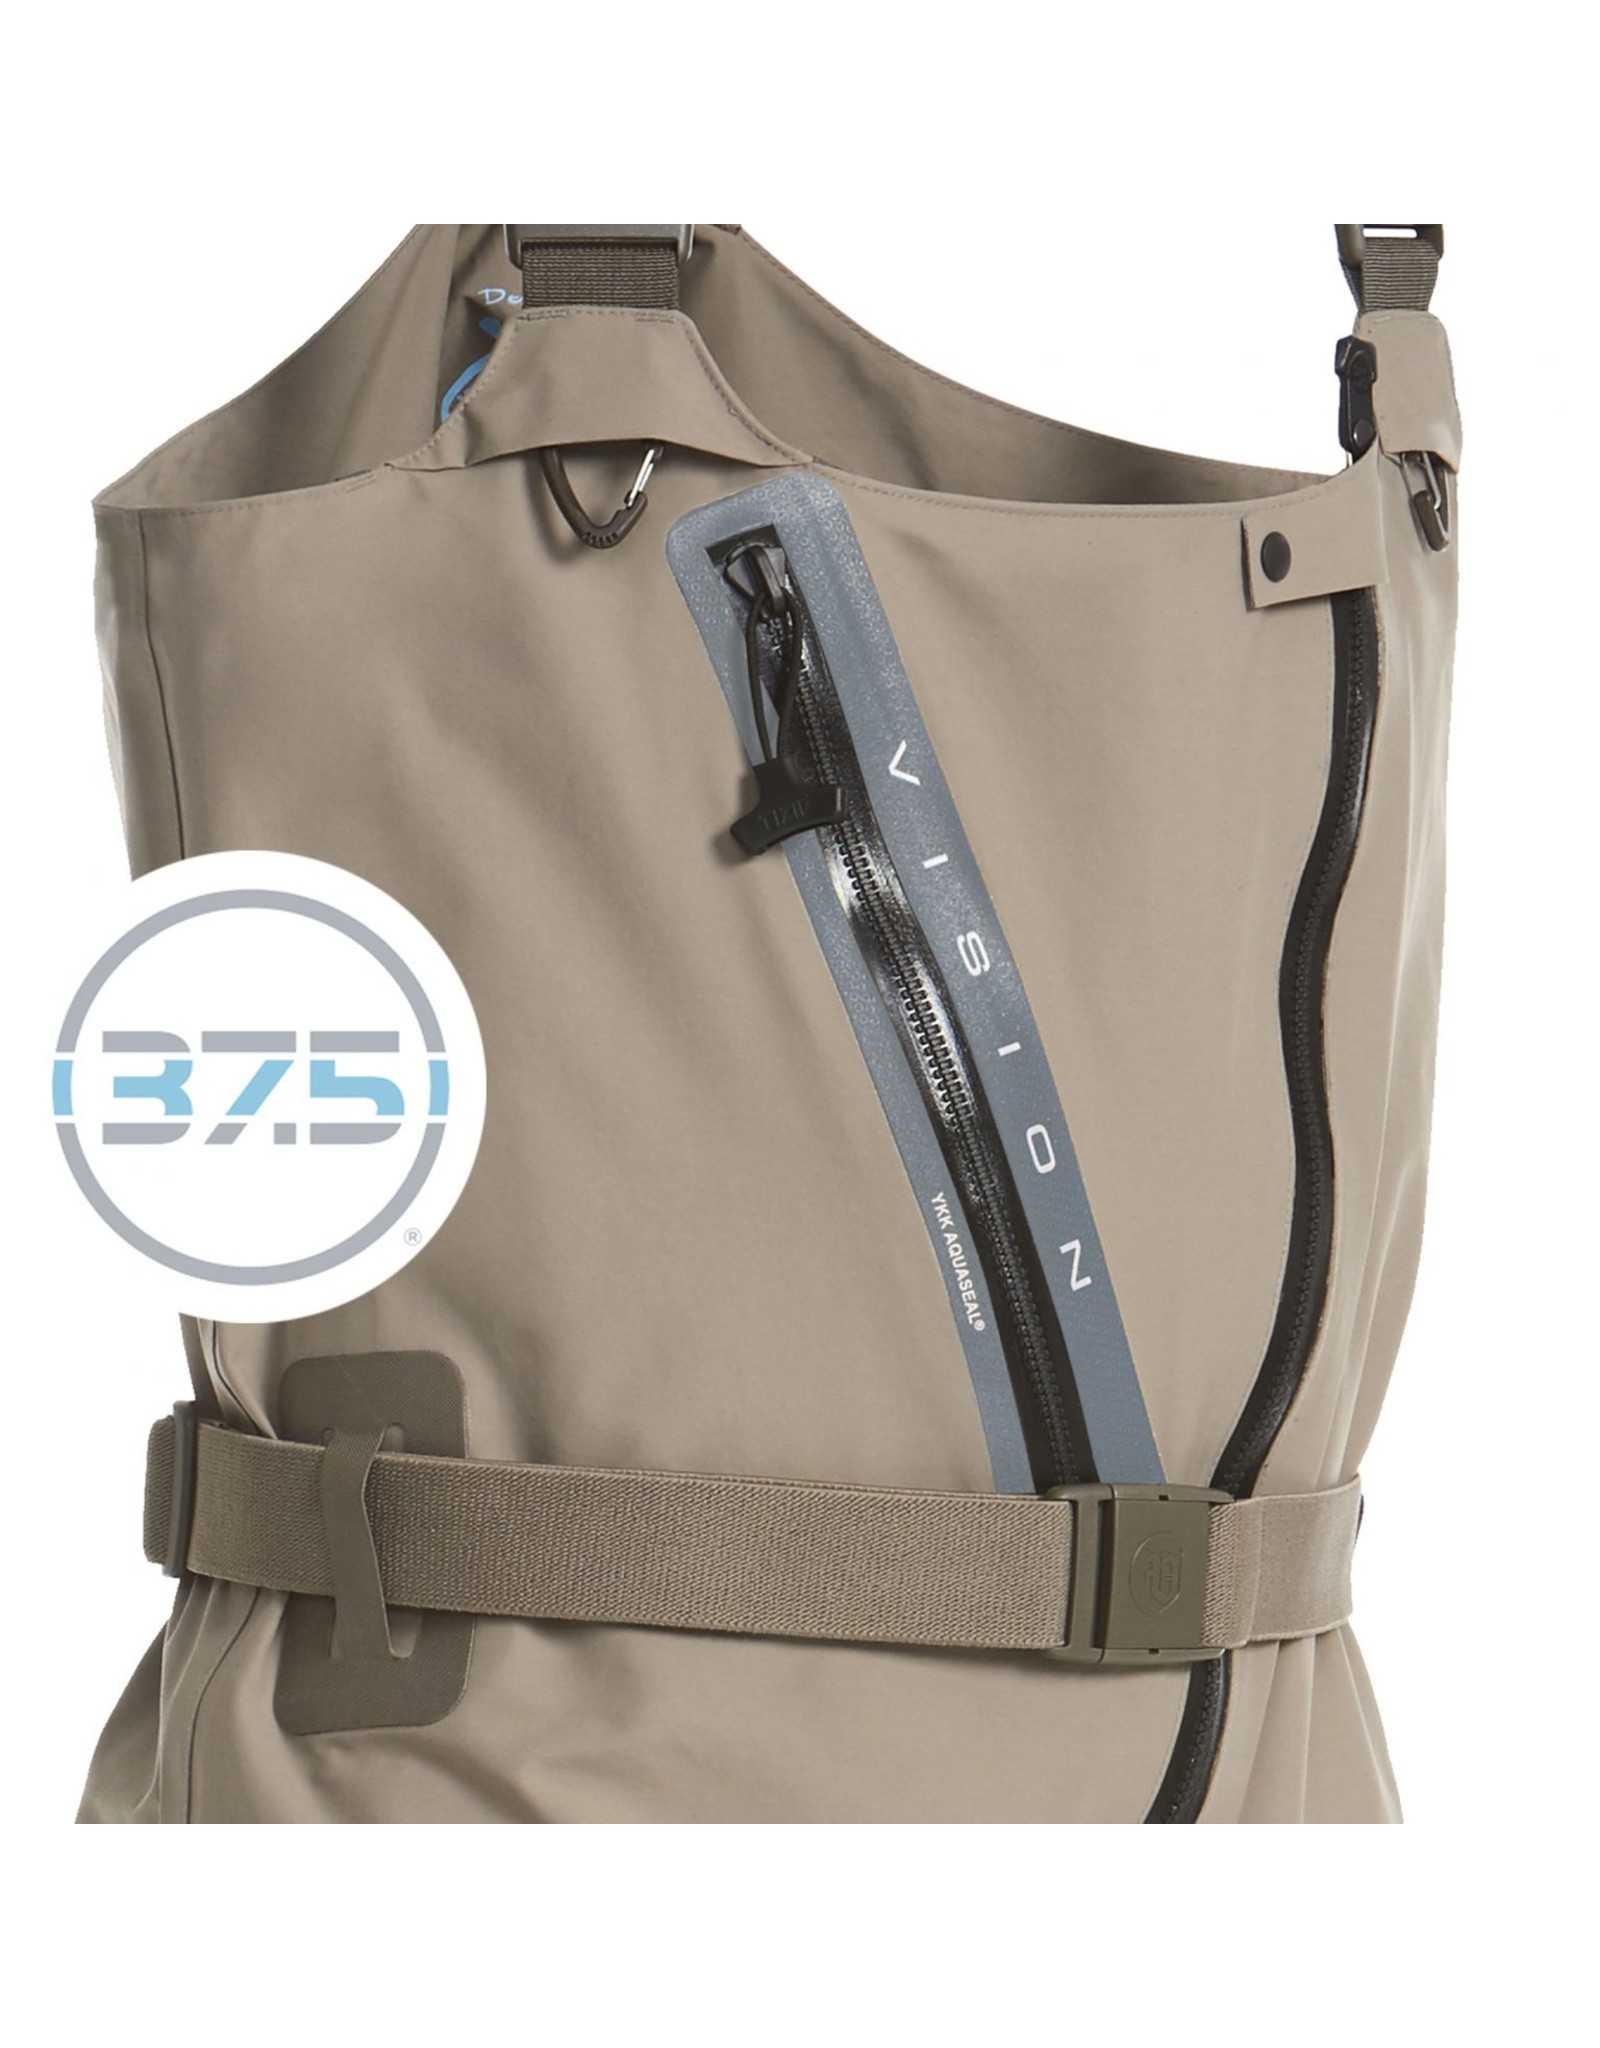 VISION FLY FISHING SCOUT 2.0 ZIP Stockingfoot Waders